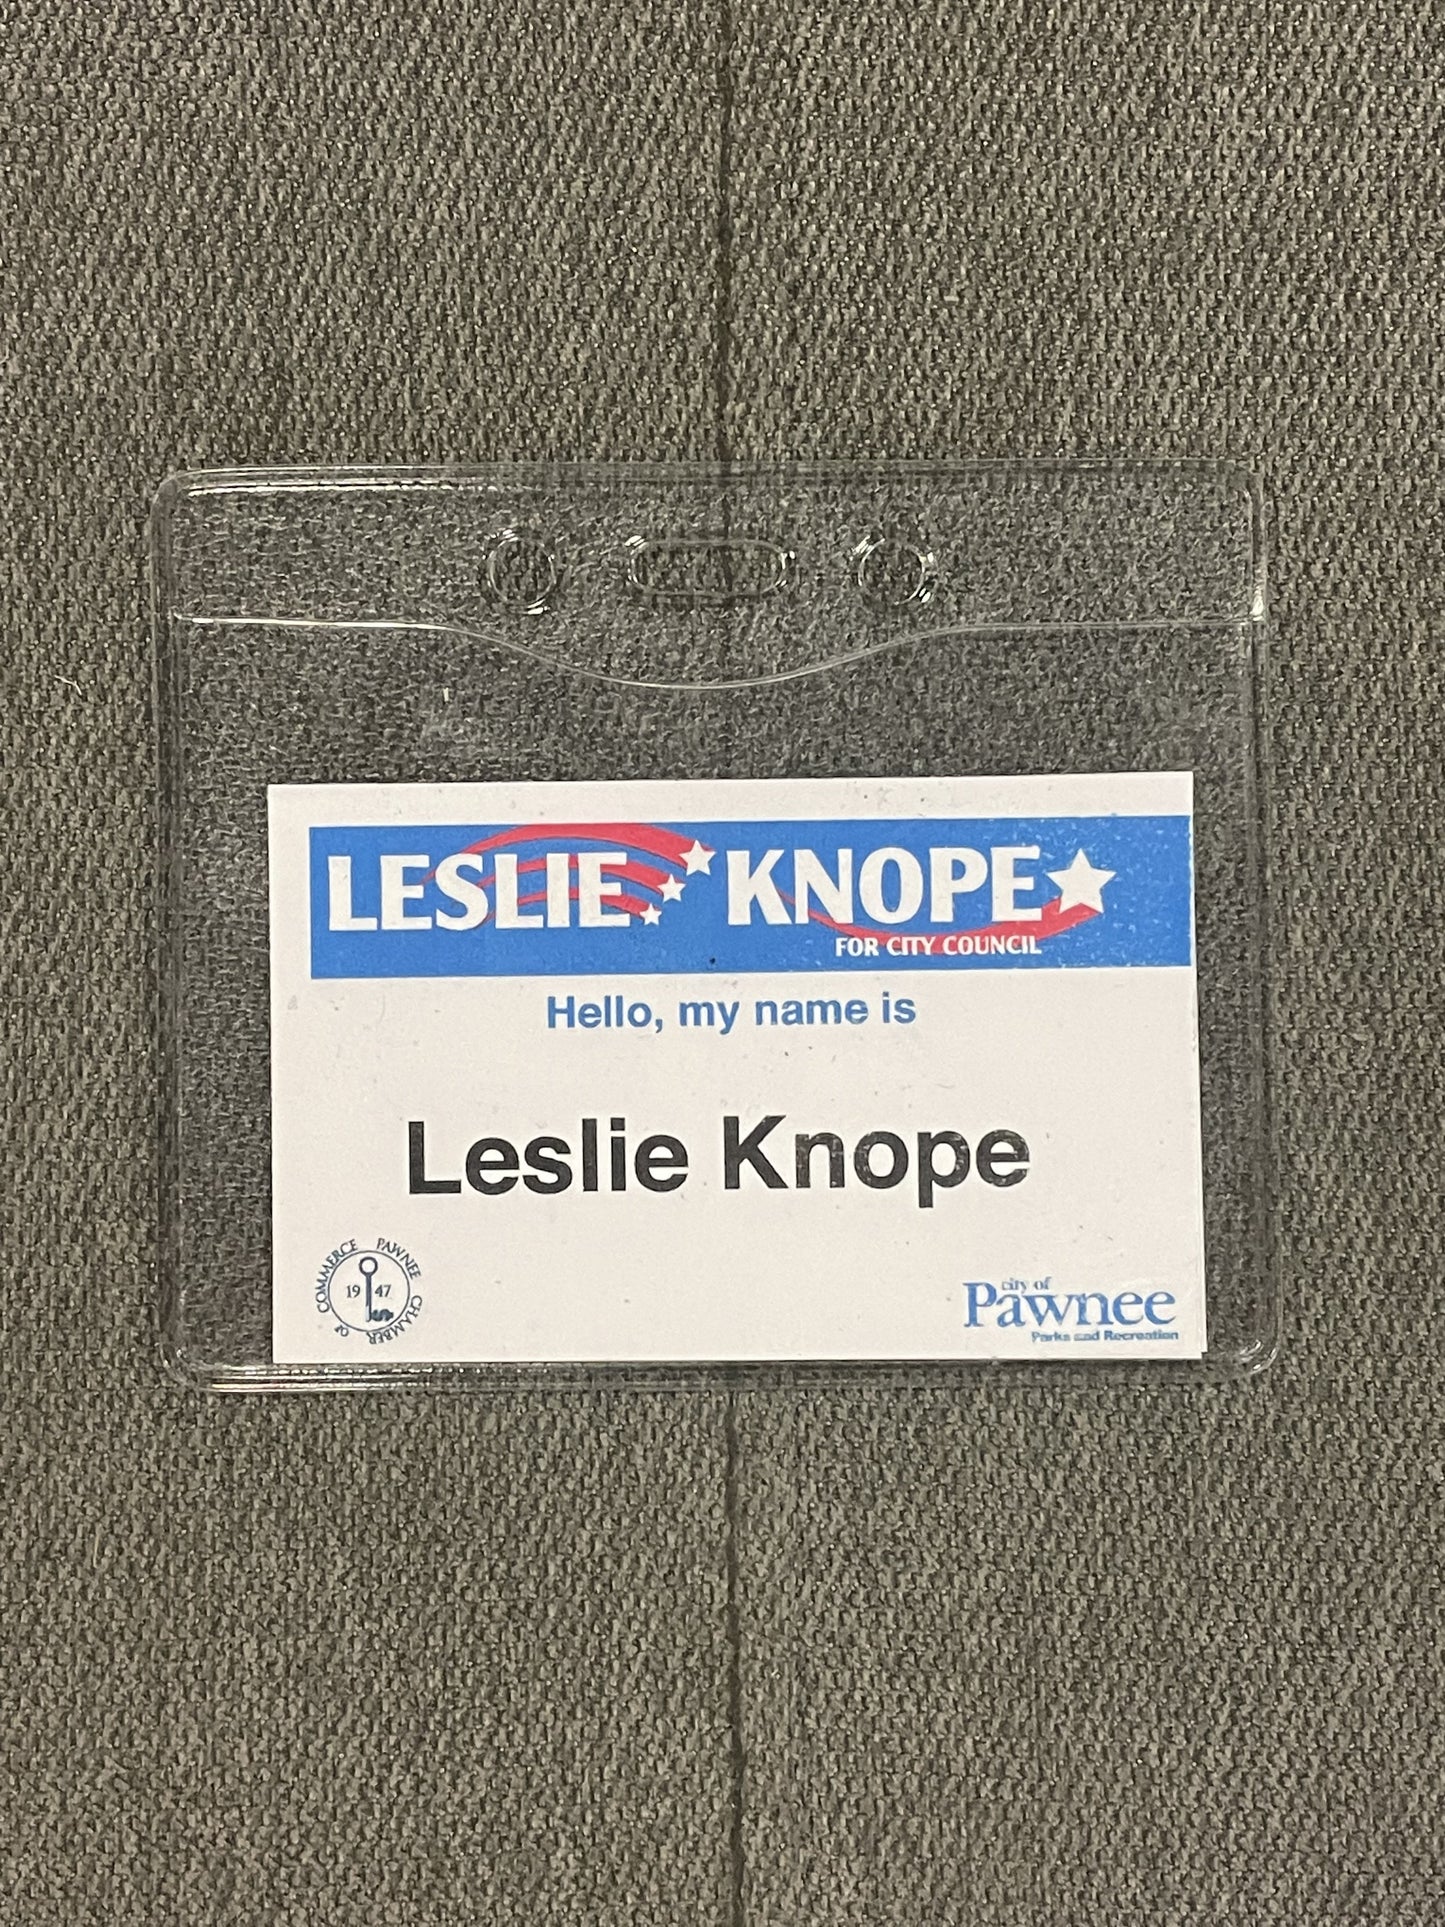 Parks and Recreation: "Hello, my name is Leslie Knope" Pawnee Nametag